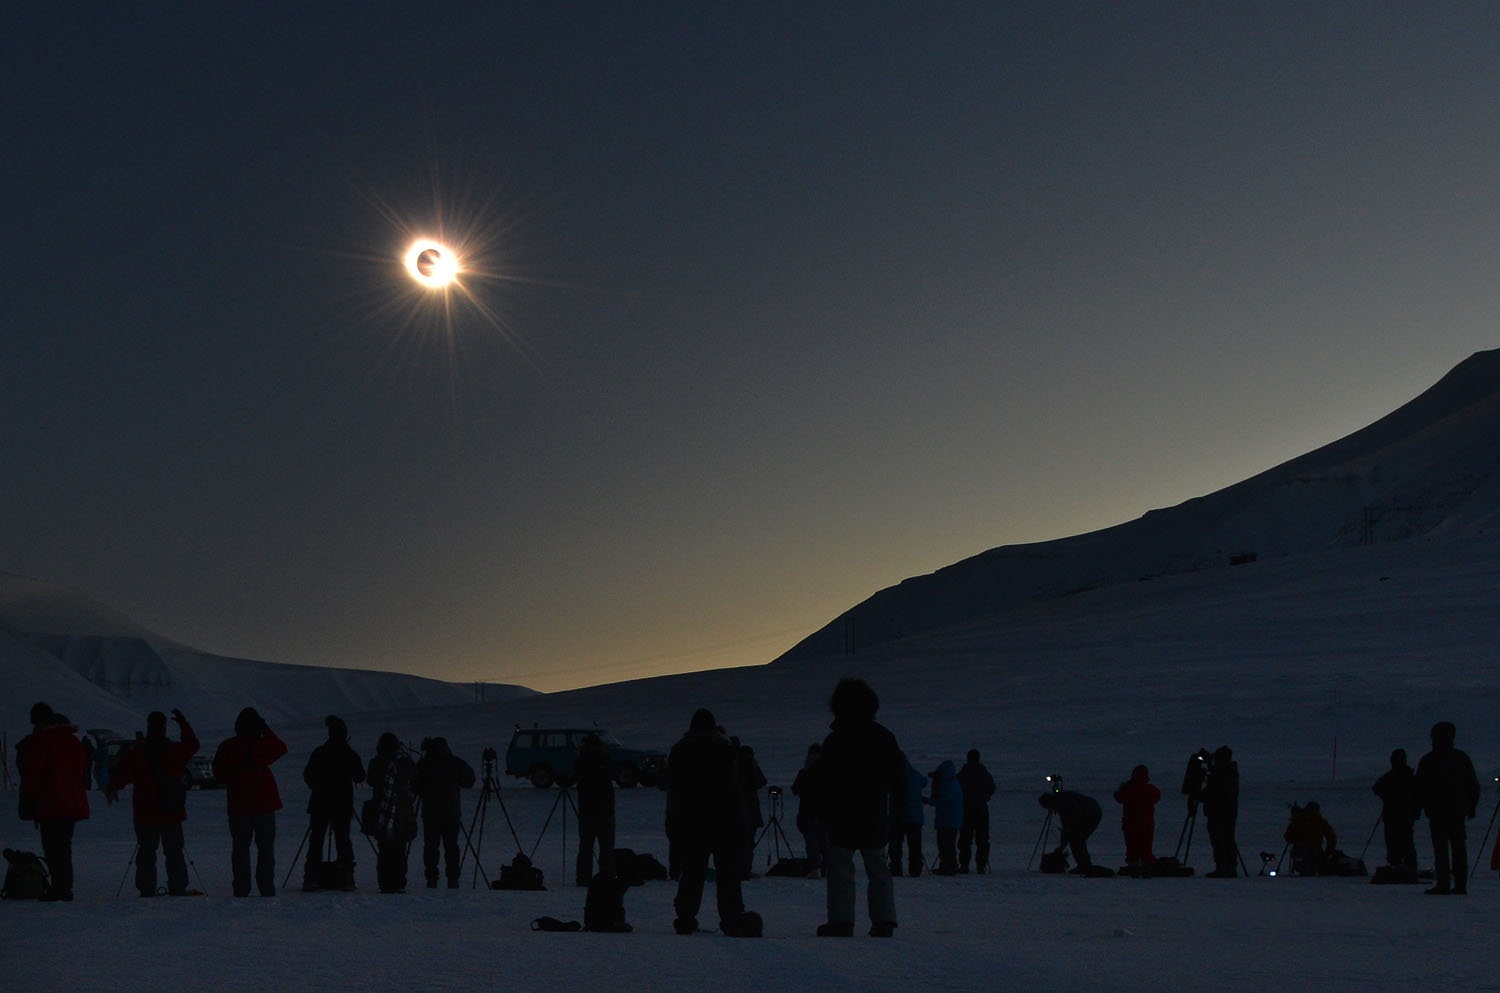 March 2015 Solar Eclipse over Svalbard Svalbard, Norway March 20, 2015  Image Credit & Copyright: Stan Honda